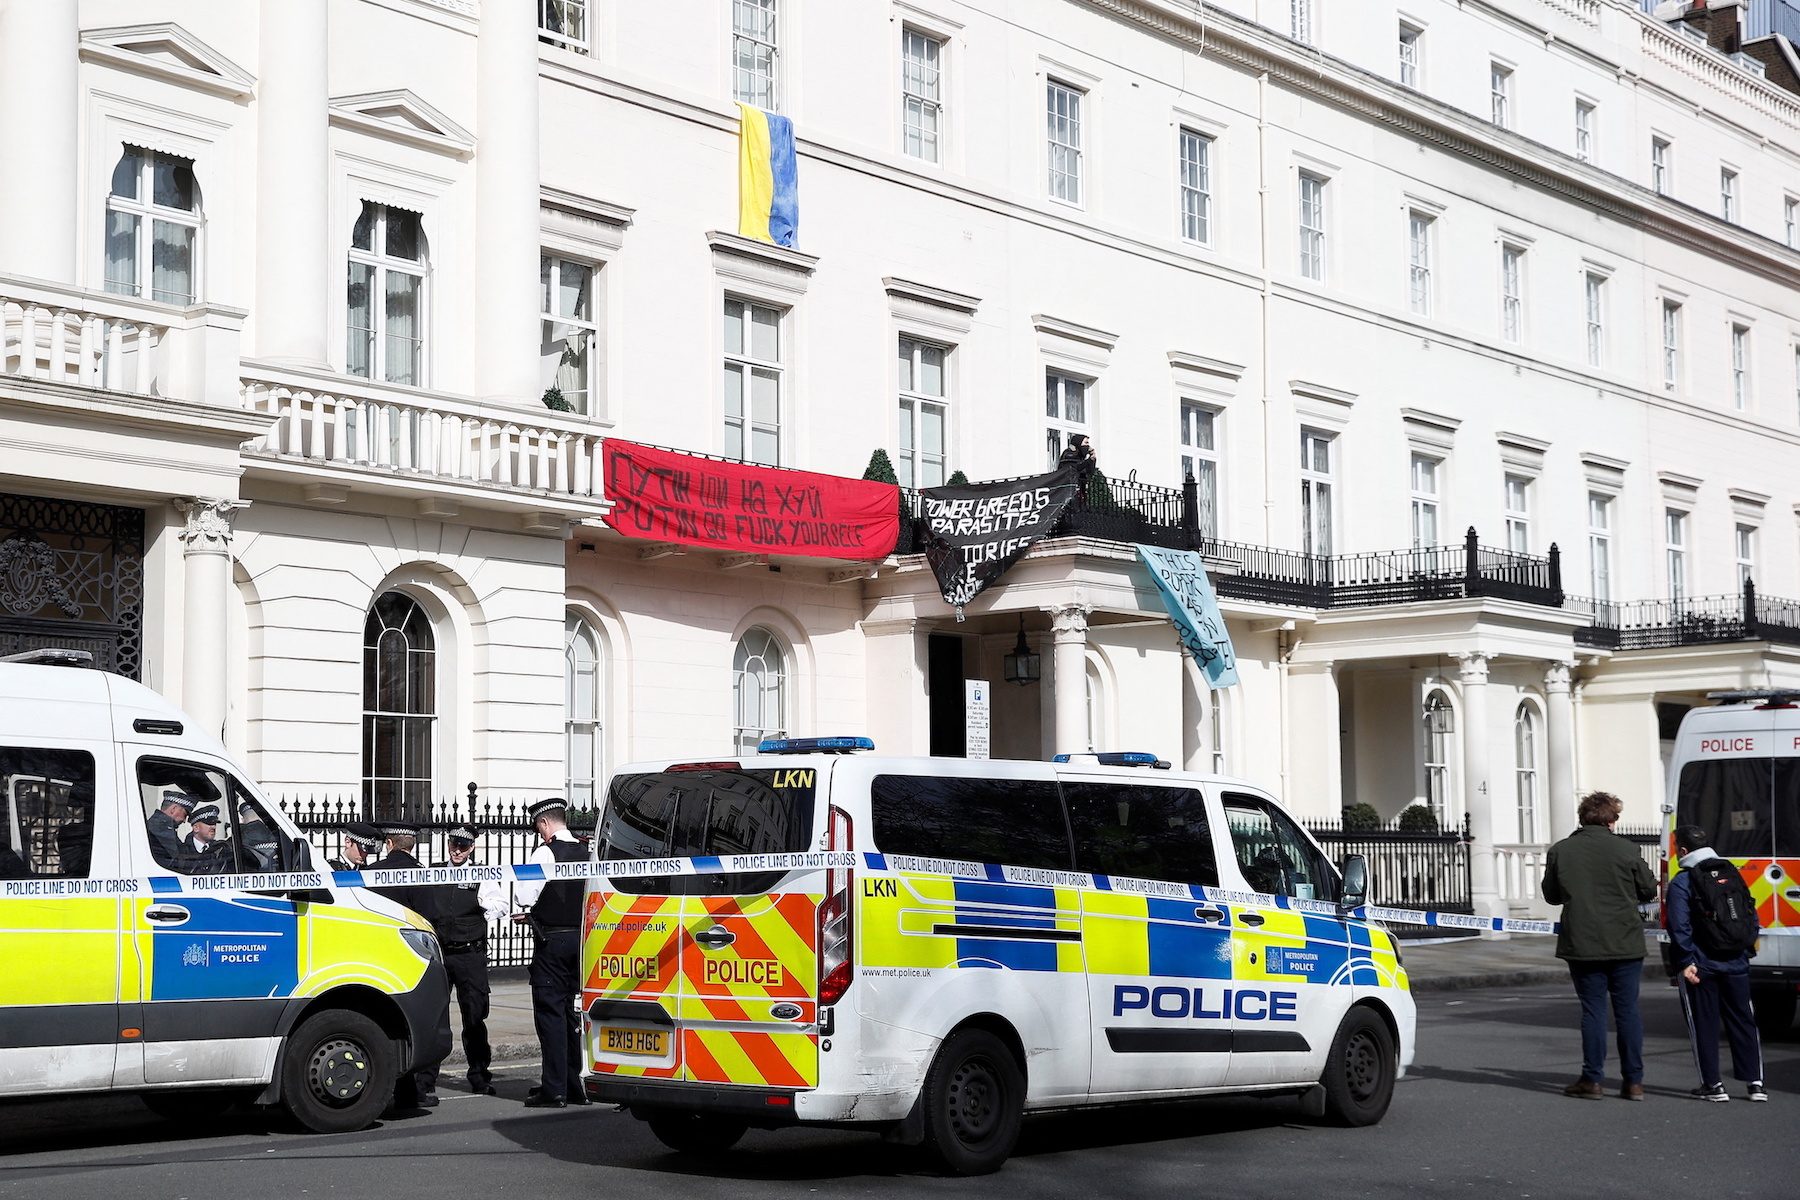 Squatters occupy Russian oligarch’s London mansion